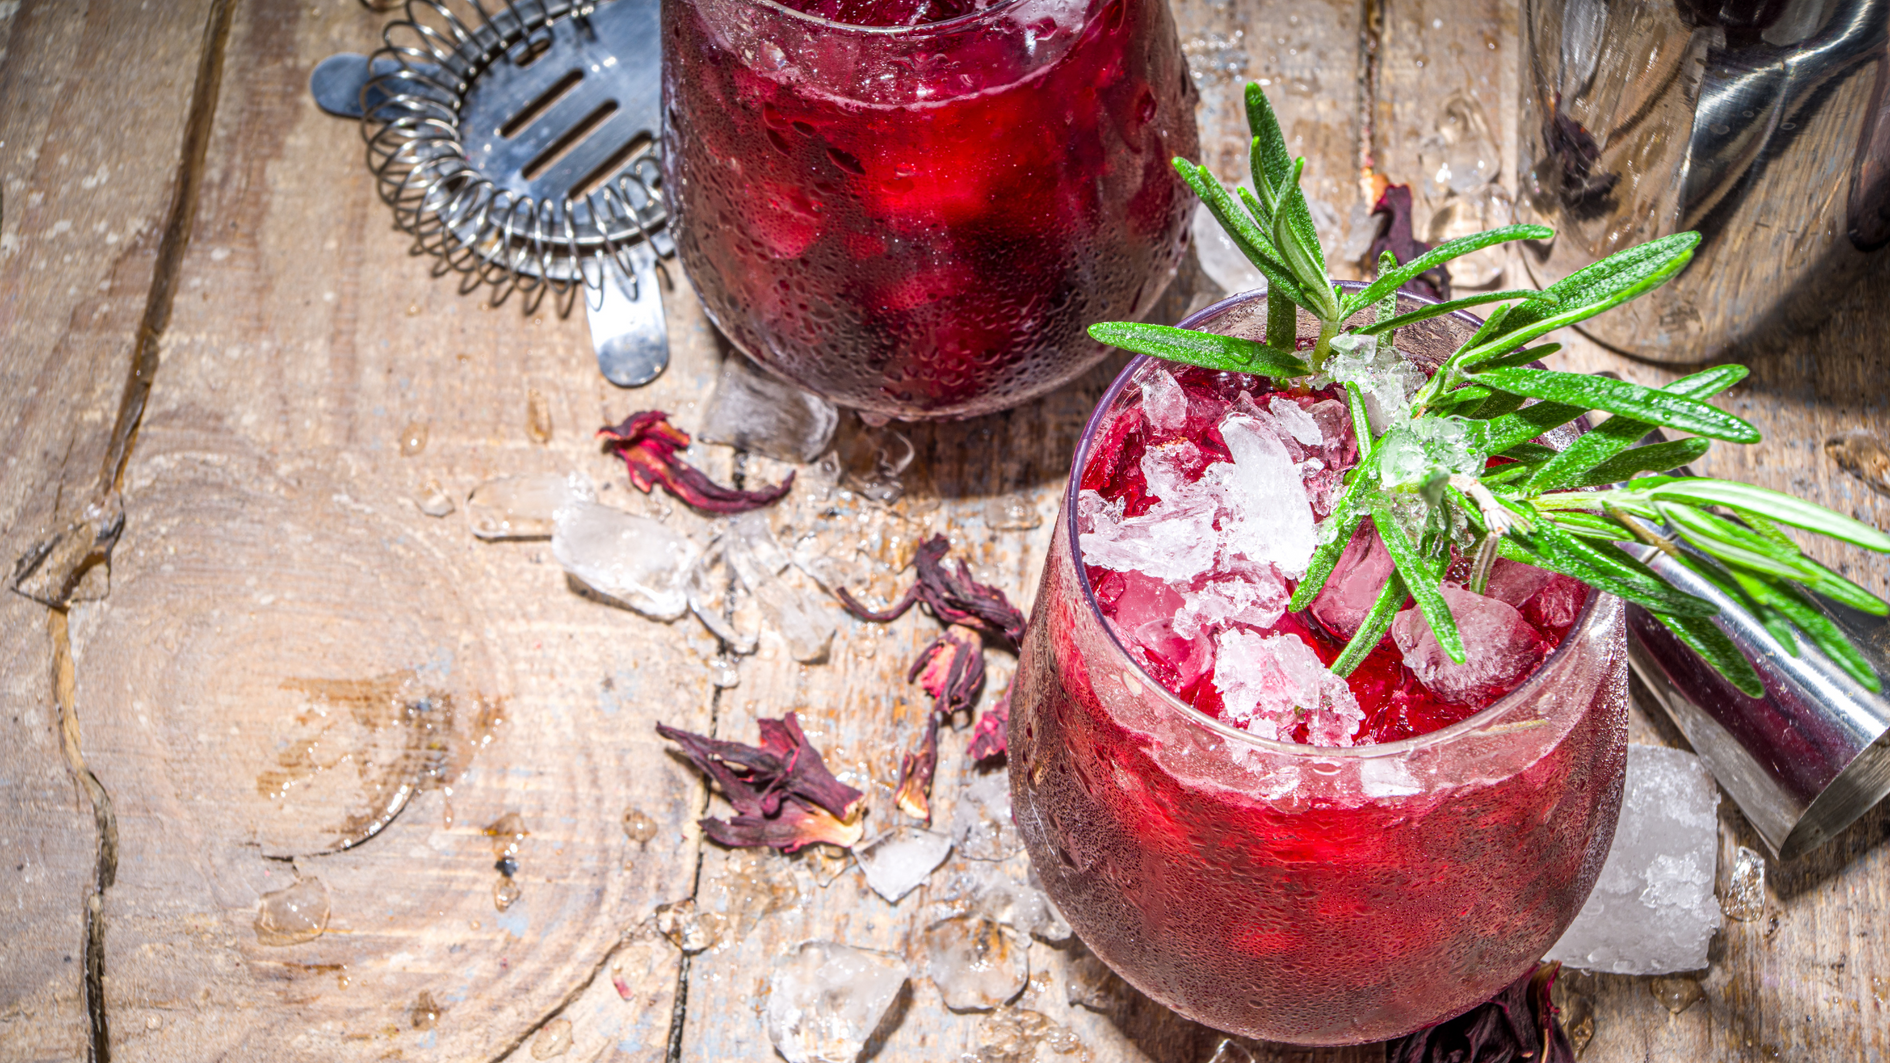 Rum Punch Recipe with Hibiscus Tea & Other Tea-Infused Cocktails